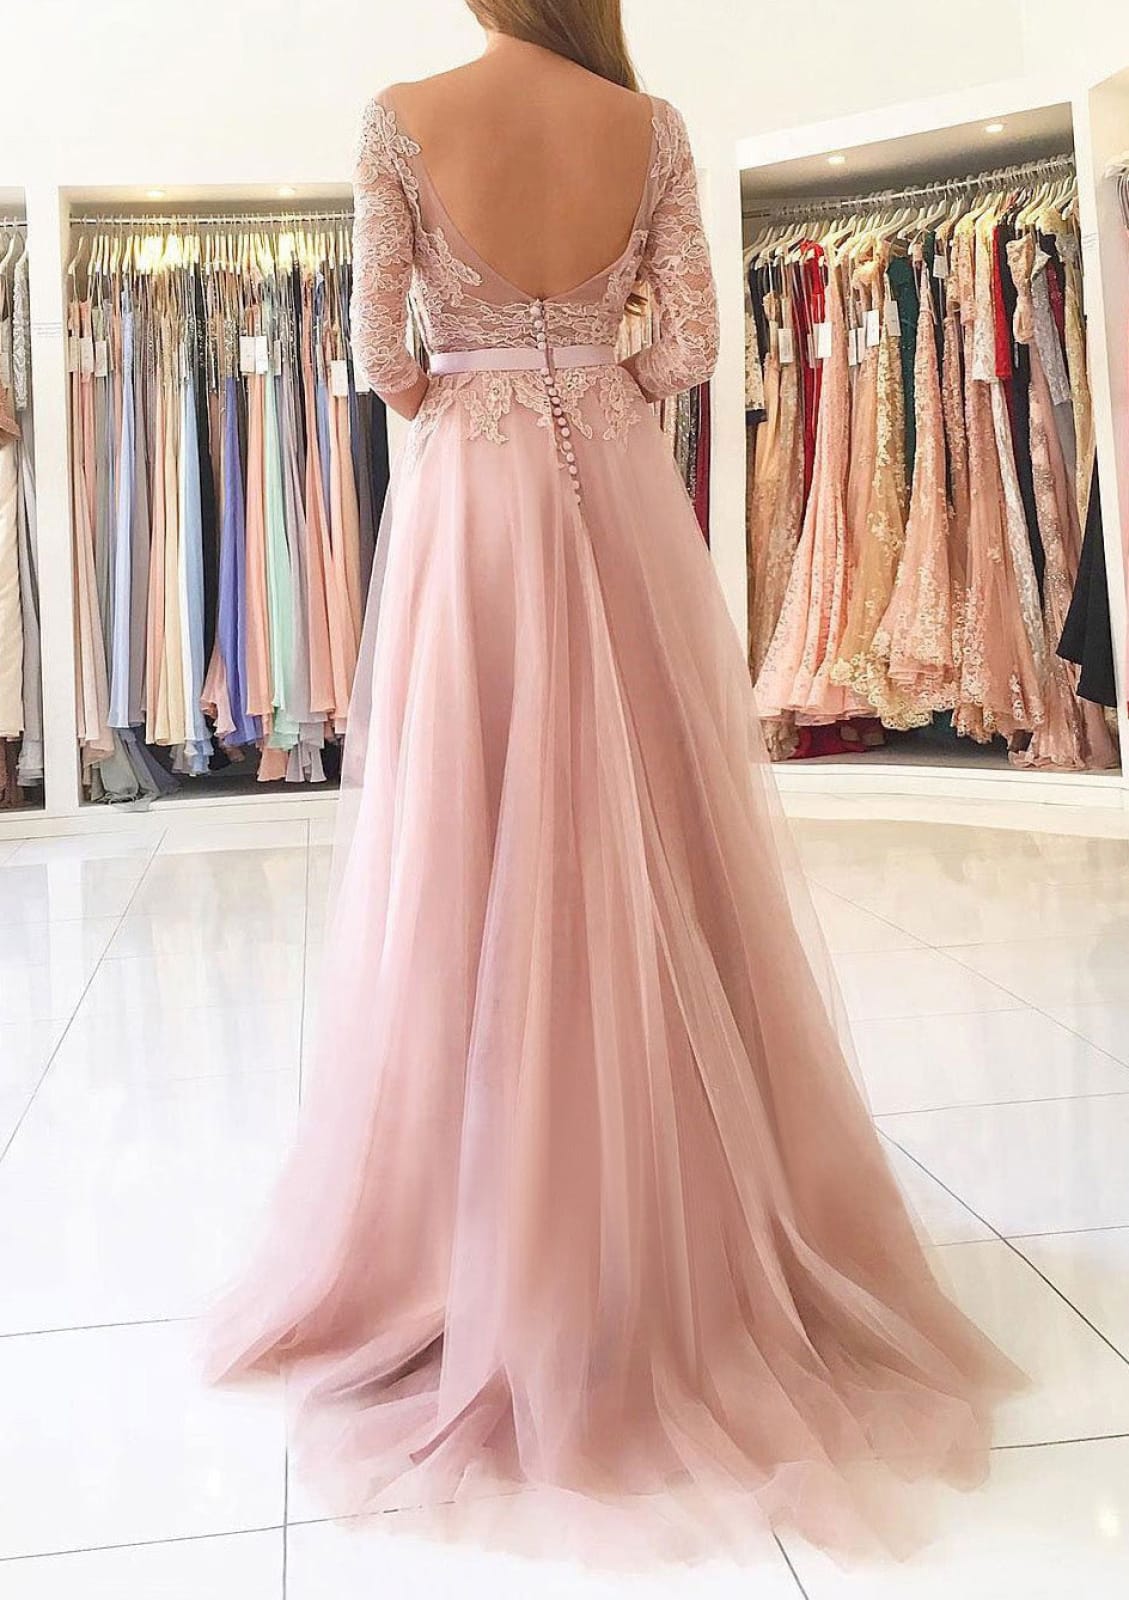 Formal Bateau 3/4 Sleeve Slit Sweep Blush Lace Tulle Evening Gown